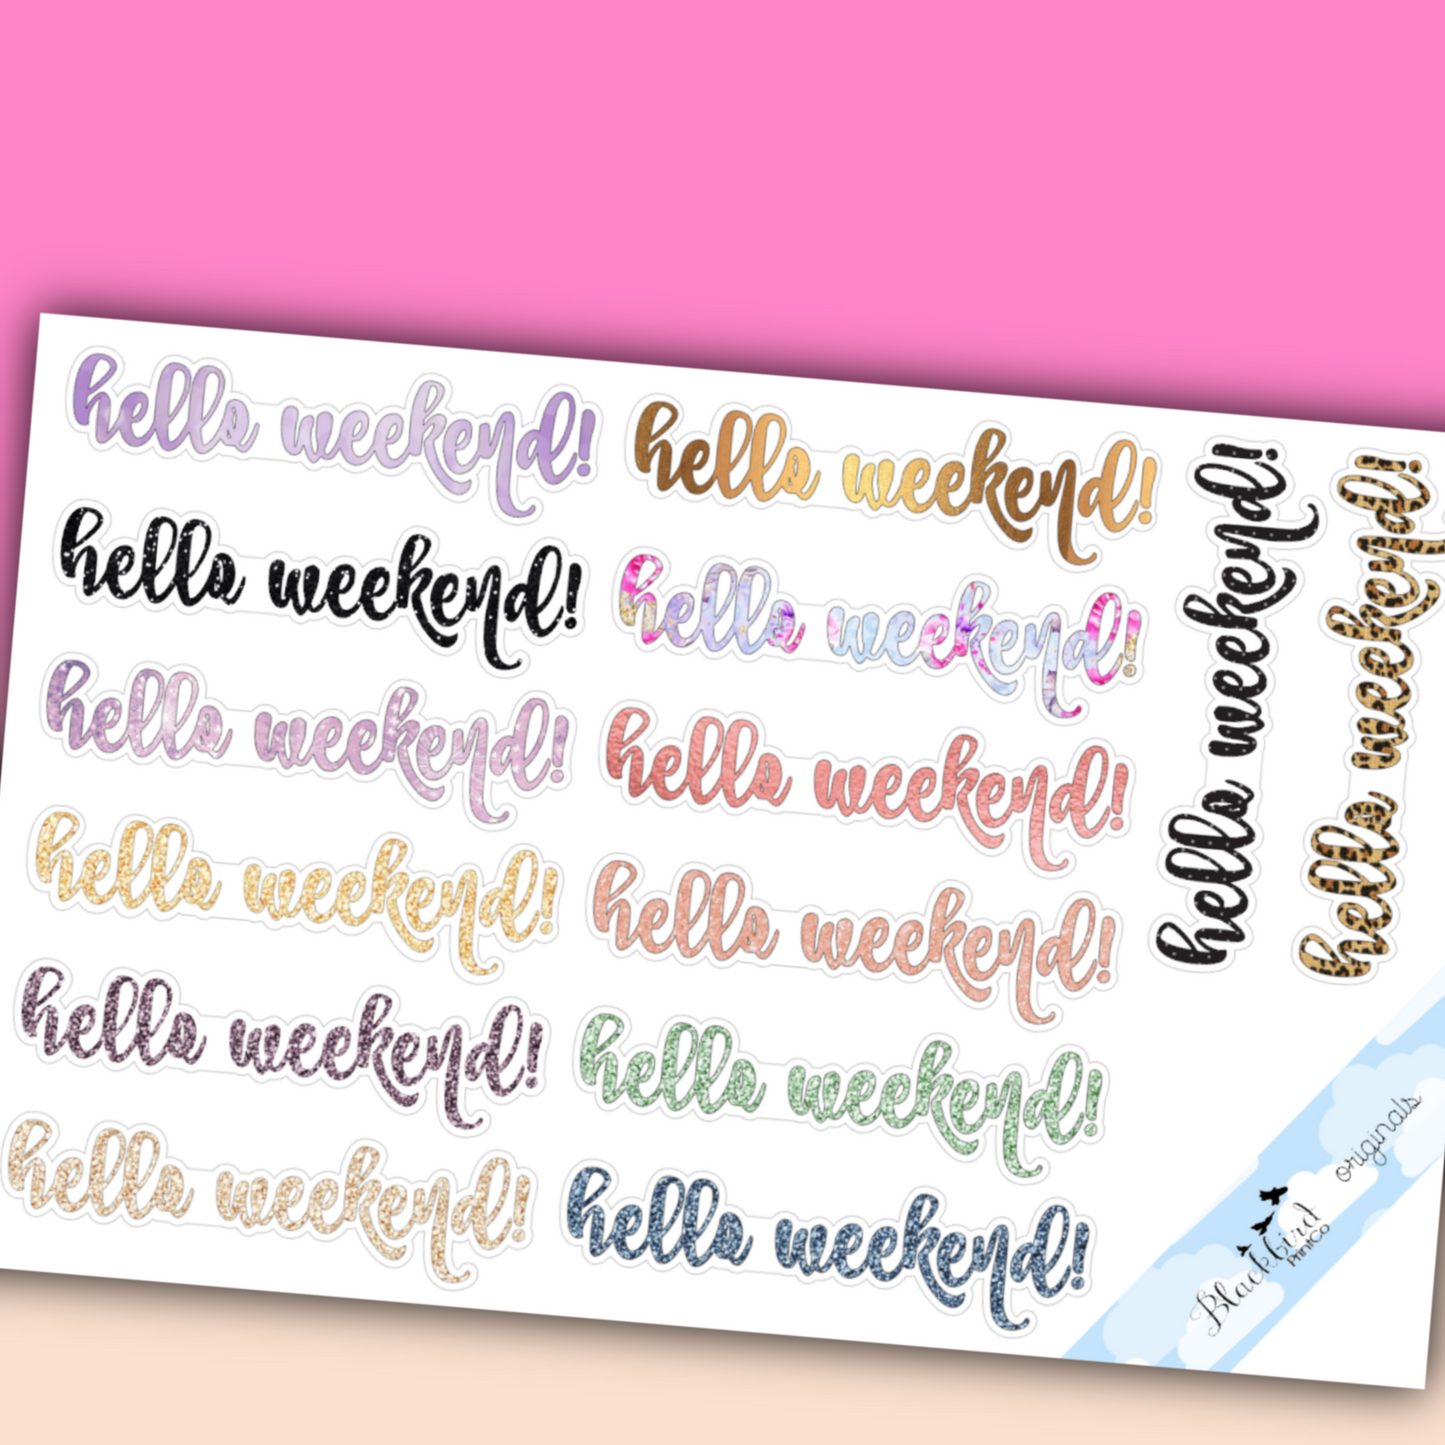 Weekend Banners for Personal Planners - Patterned